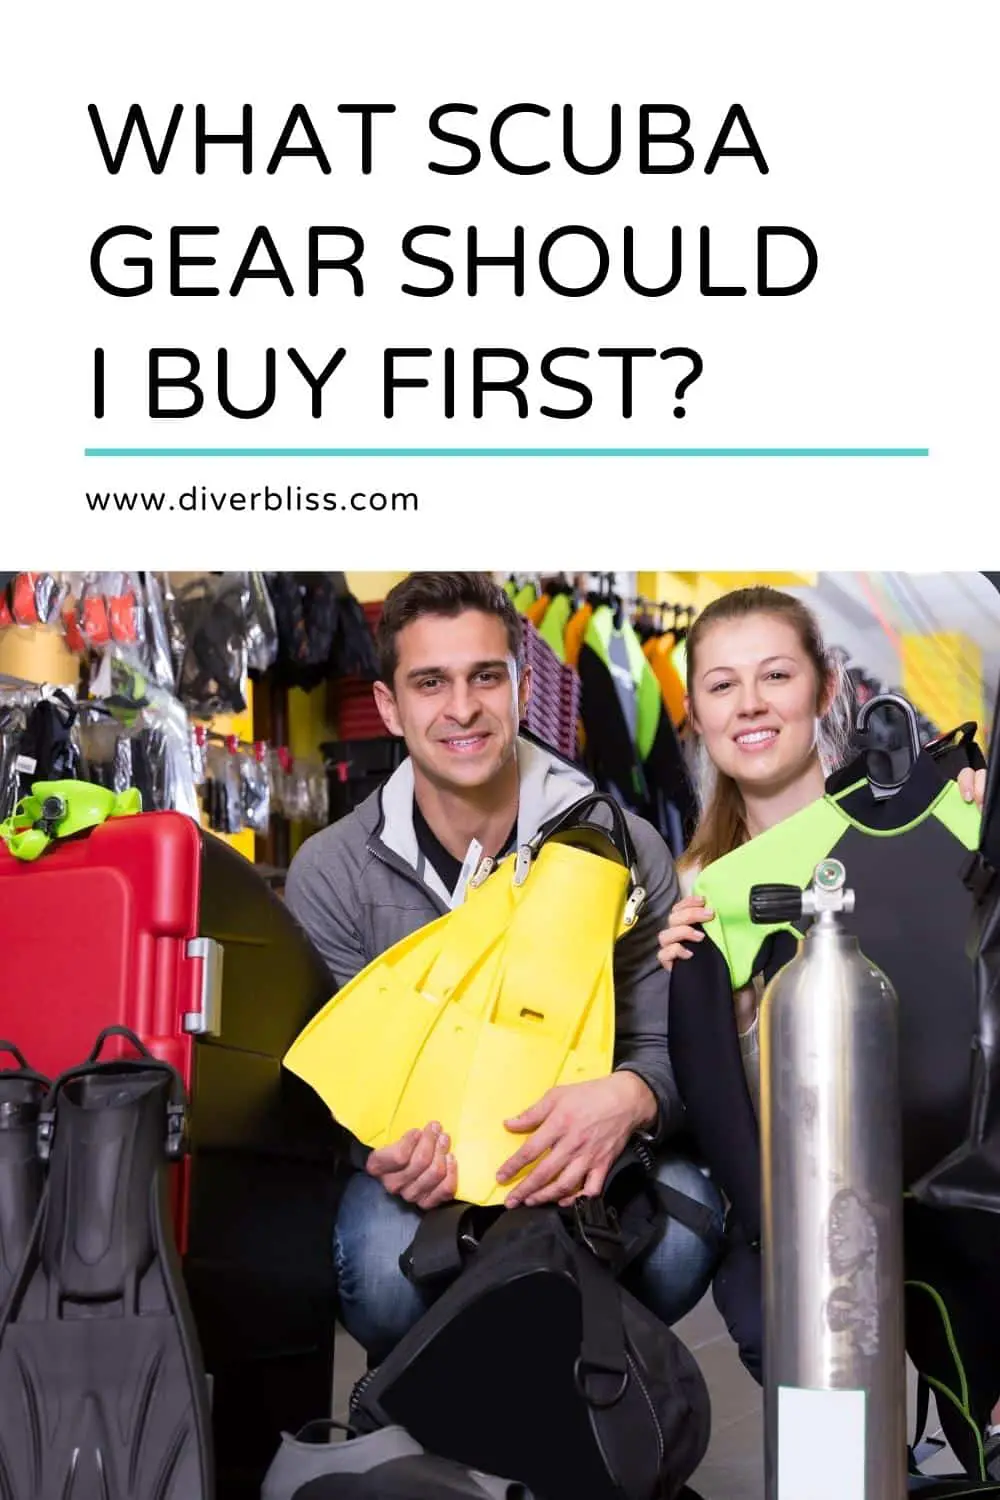 what scuba gear should i buy first?